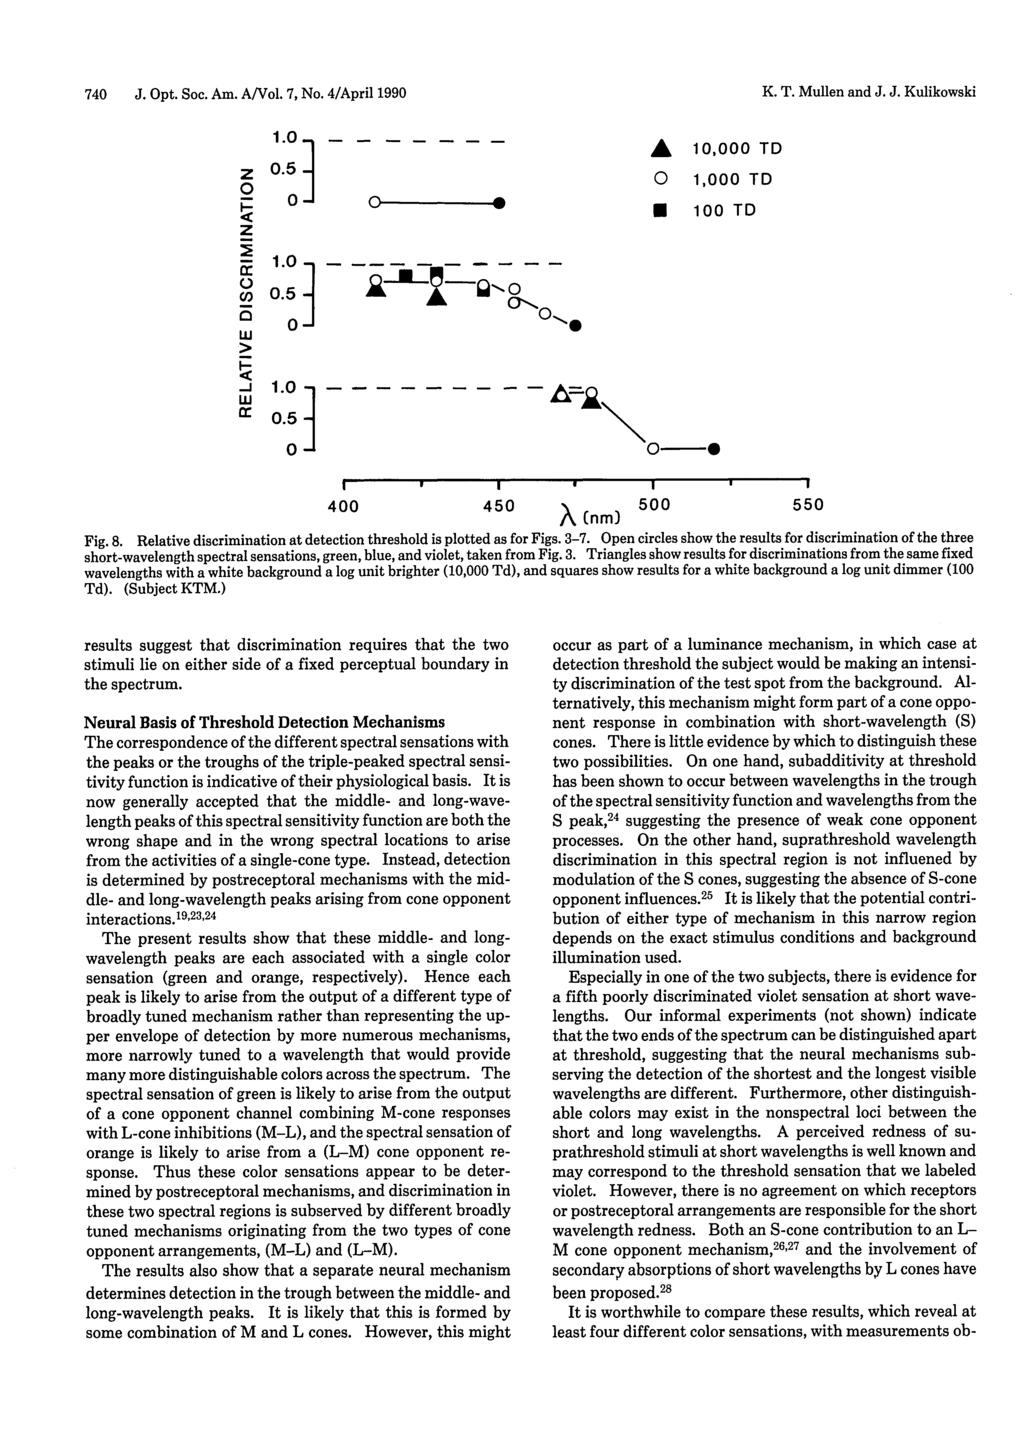 74 J. Opt. Soc. Am. A/Vol. 7, No. 4/April 199 K. T. Mullen and J. J. Kulikowski occur as part of a luminance mechanism, in which case at detection threshold the subject would be making an intensity discrimination of the test spot from the background.